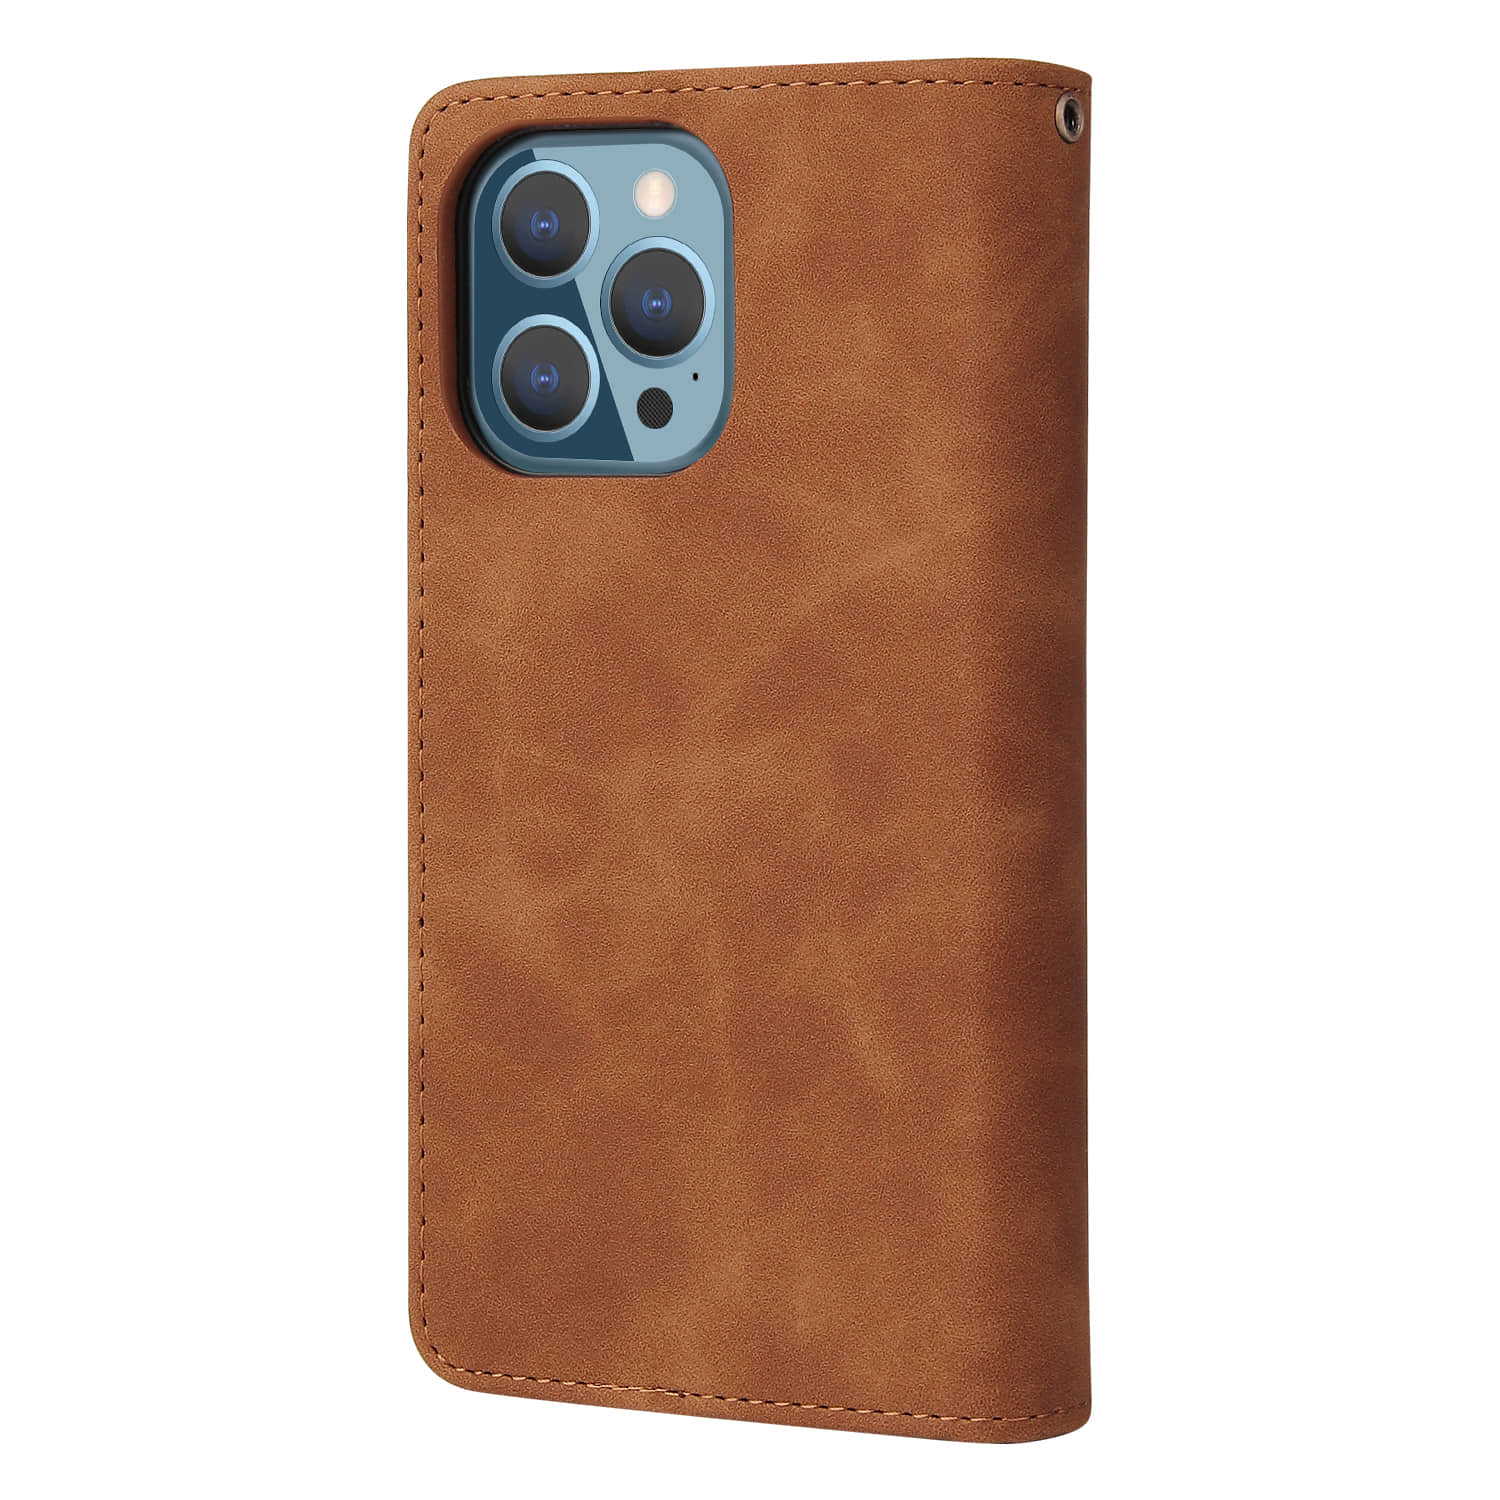 Caeouts Classic Clamshell Phone Case Brown